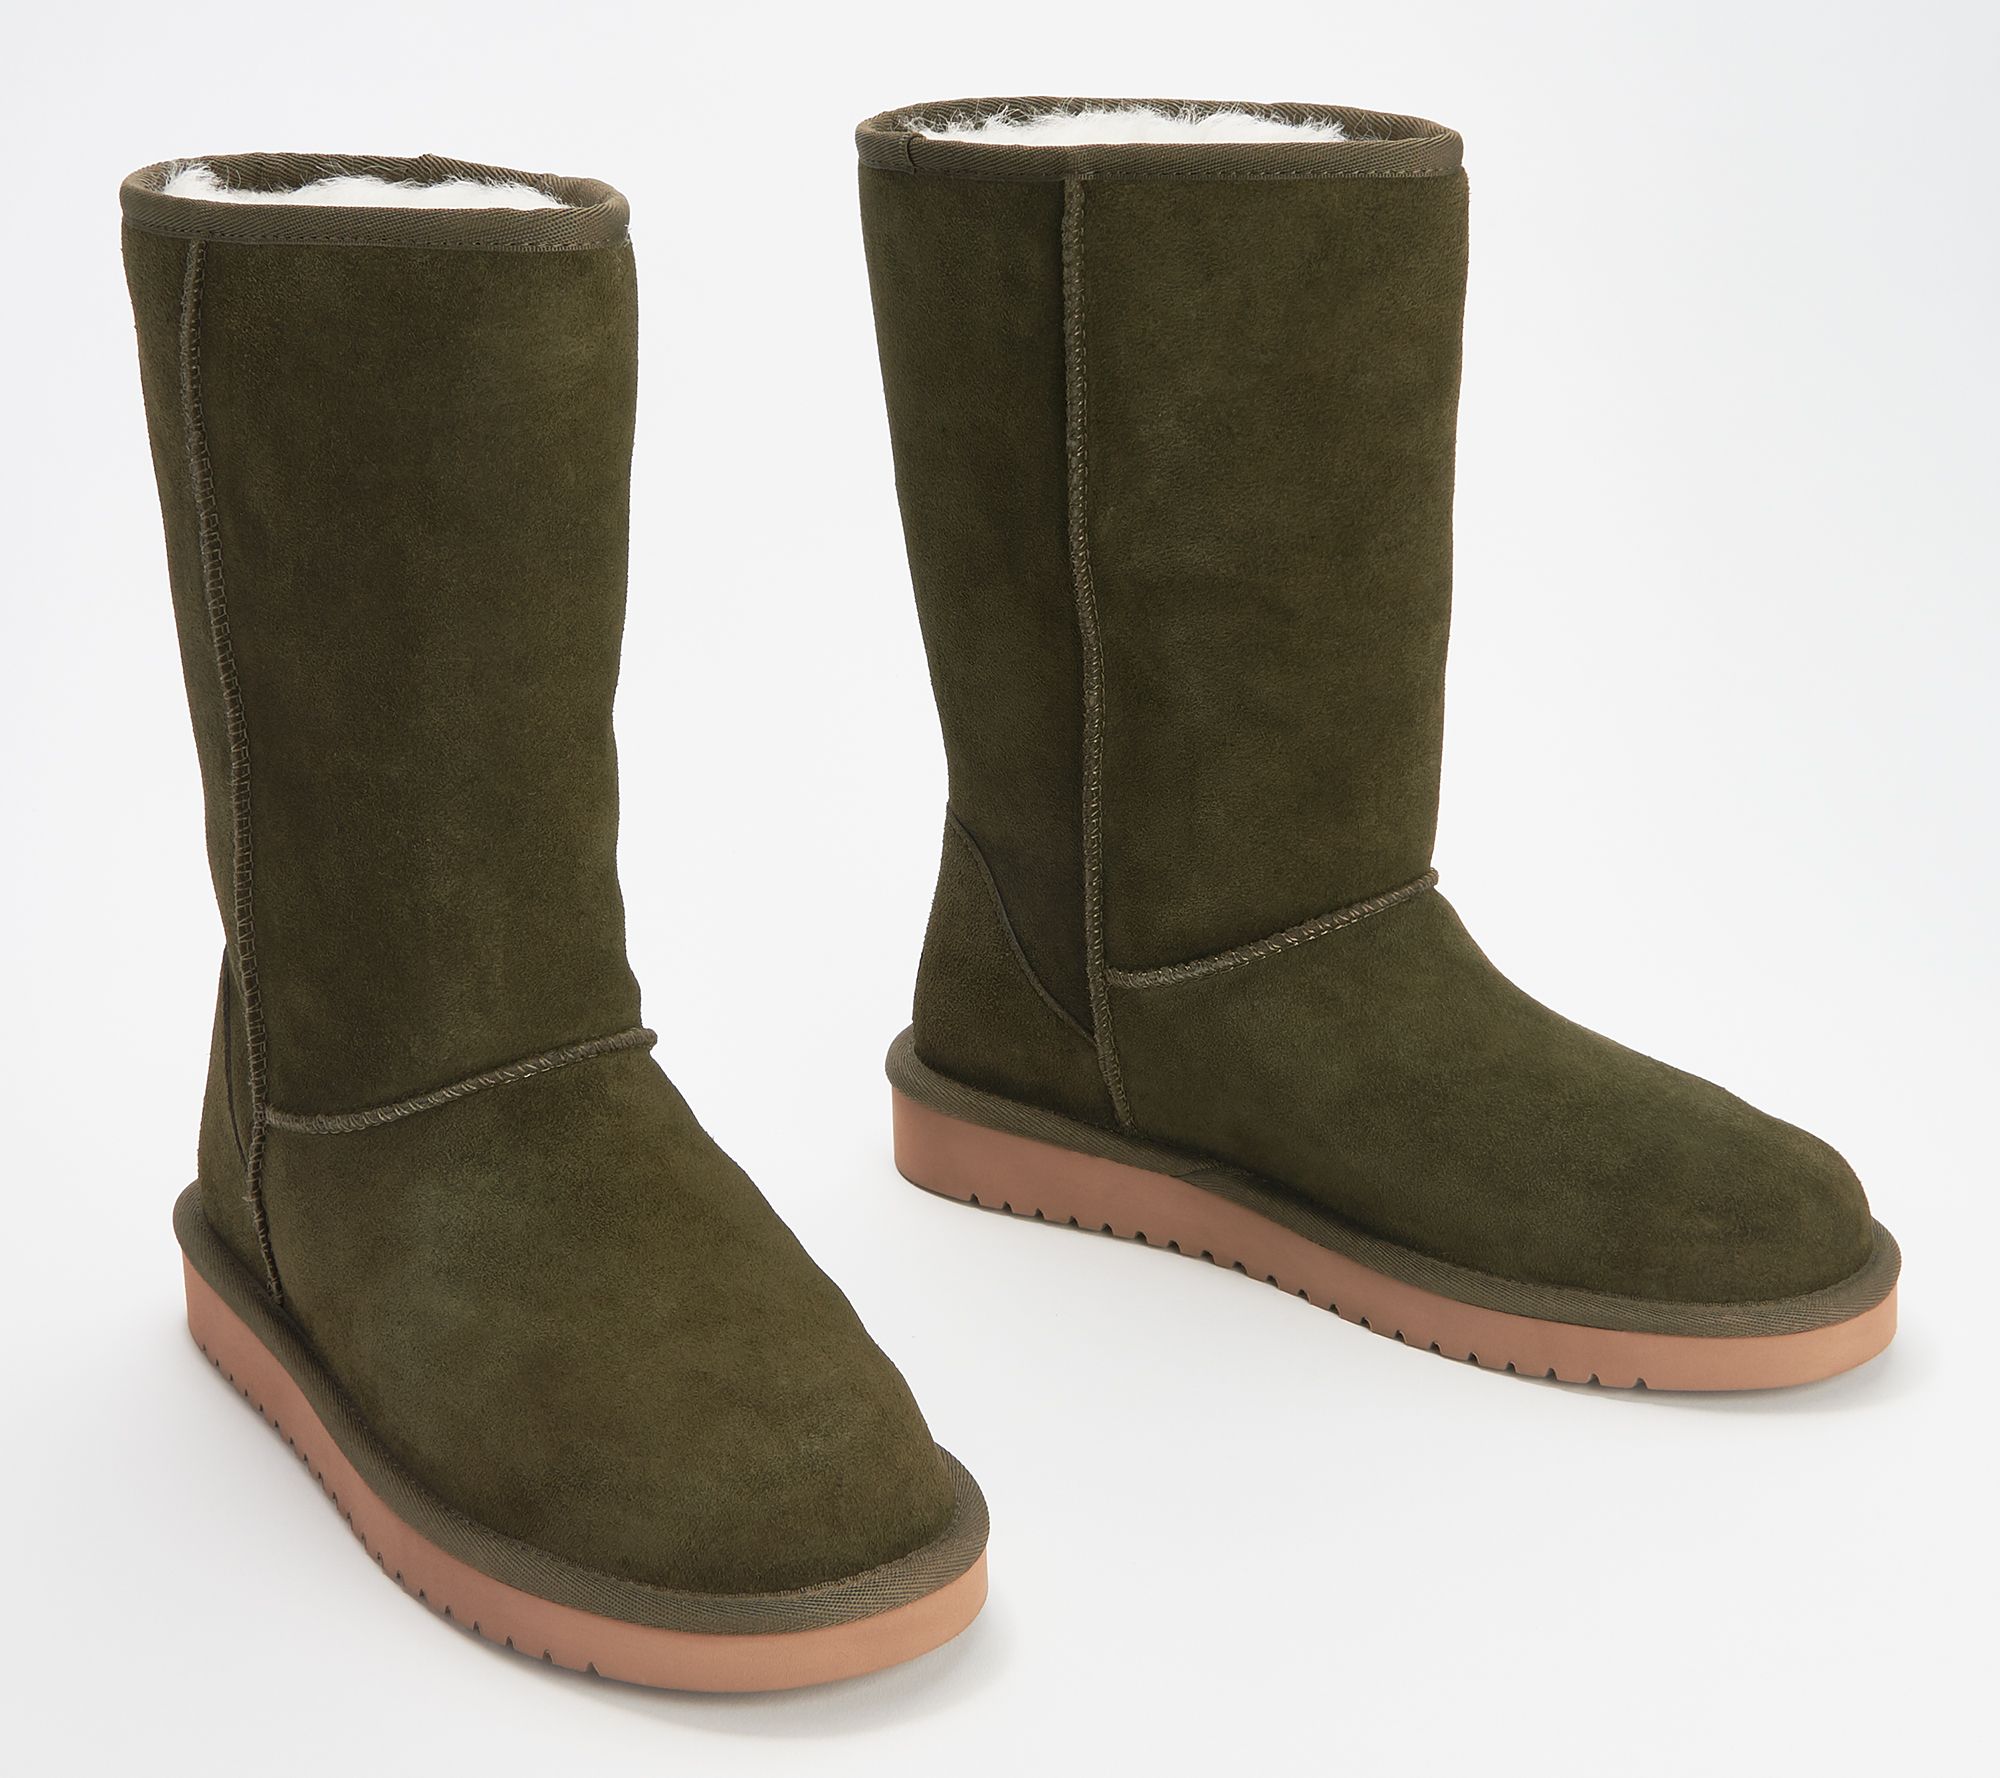 green ugg boots